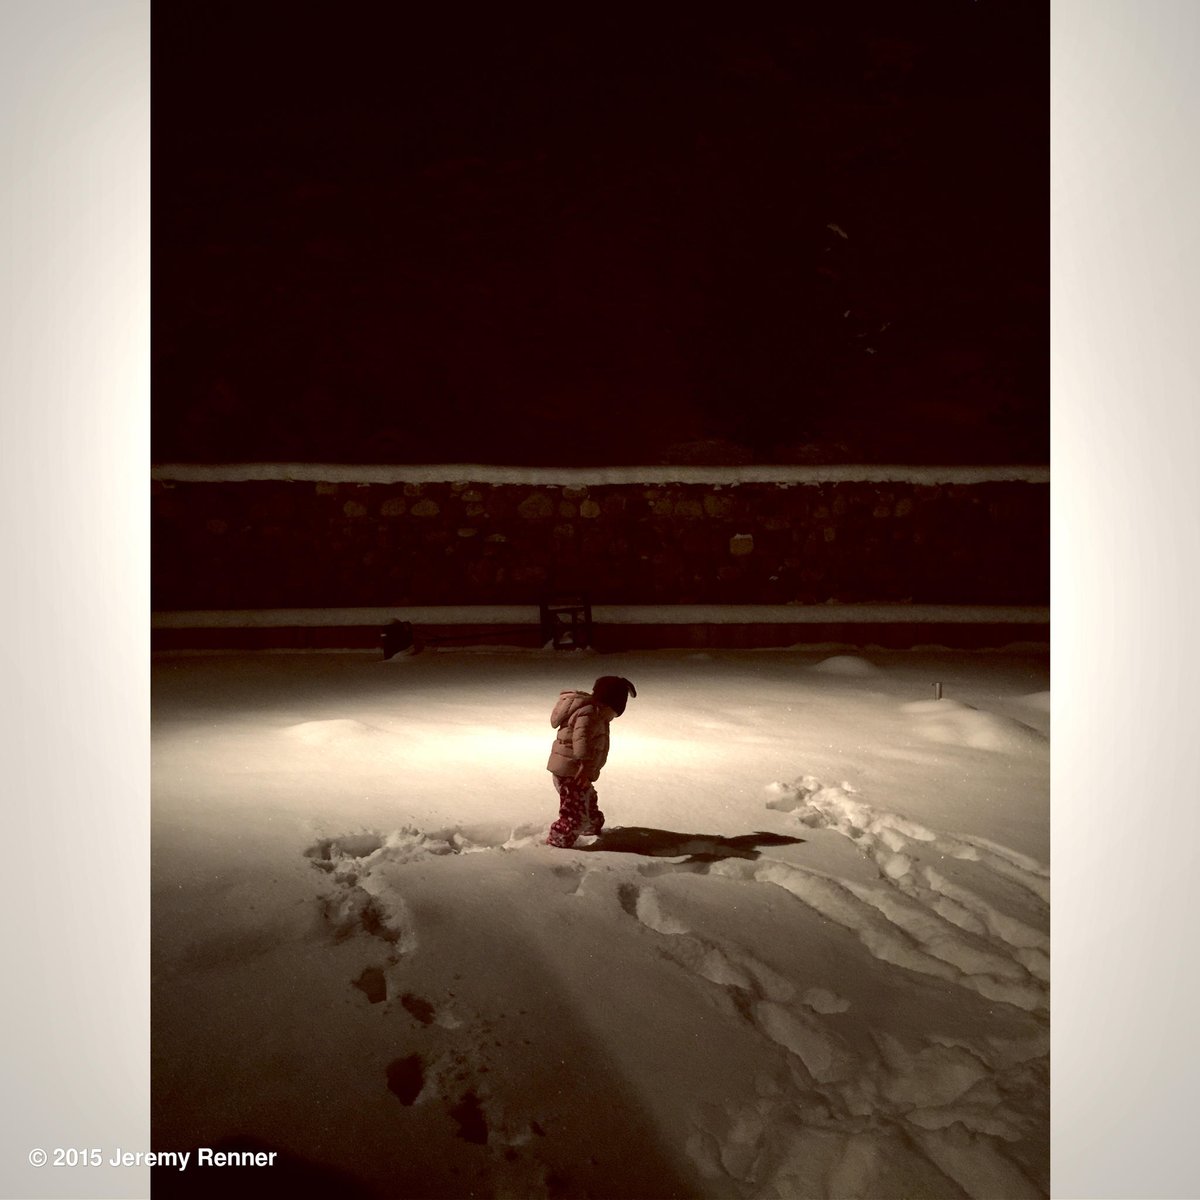 My snow angel finally meets the snow!! #daddy #anotherfirst #snowman #tahoe #love #bundleup https://t.co/fRkb3bEcAV